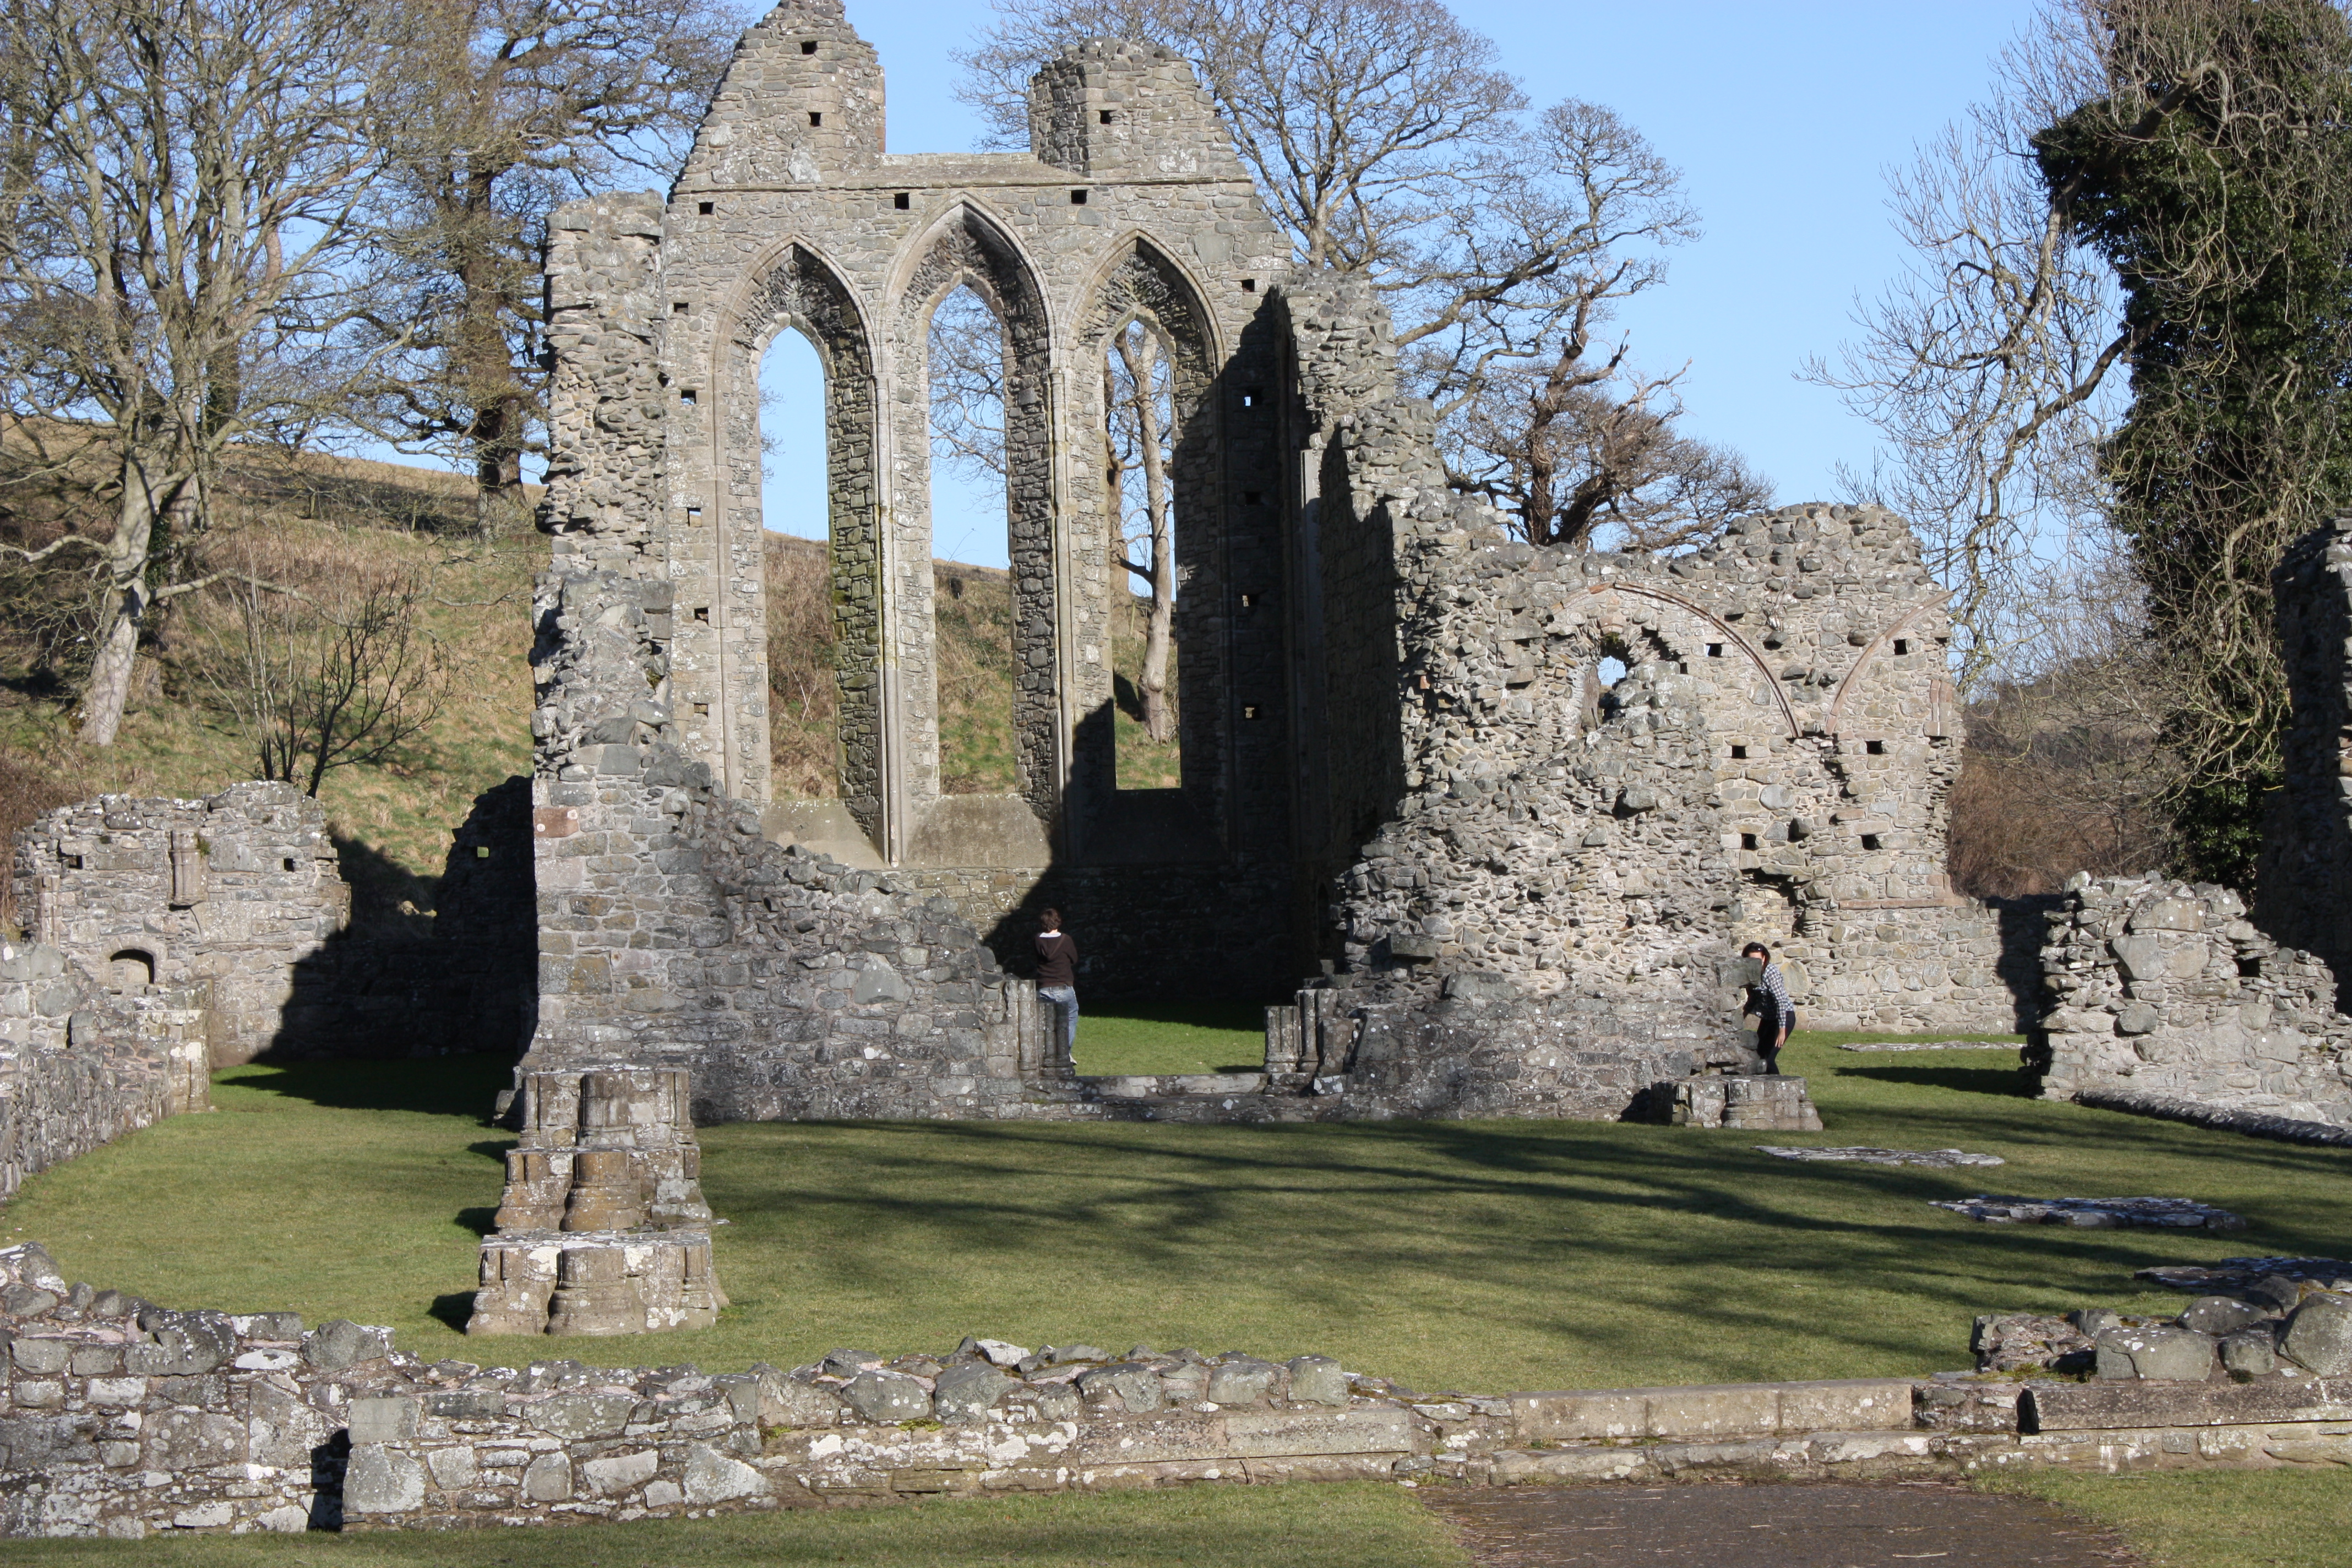 The Arch of Inch Abbey